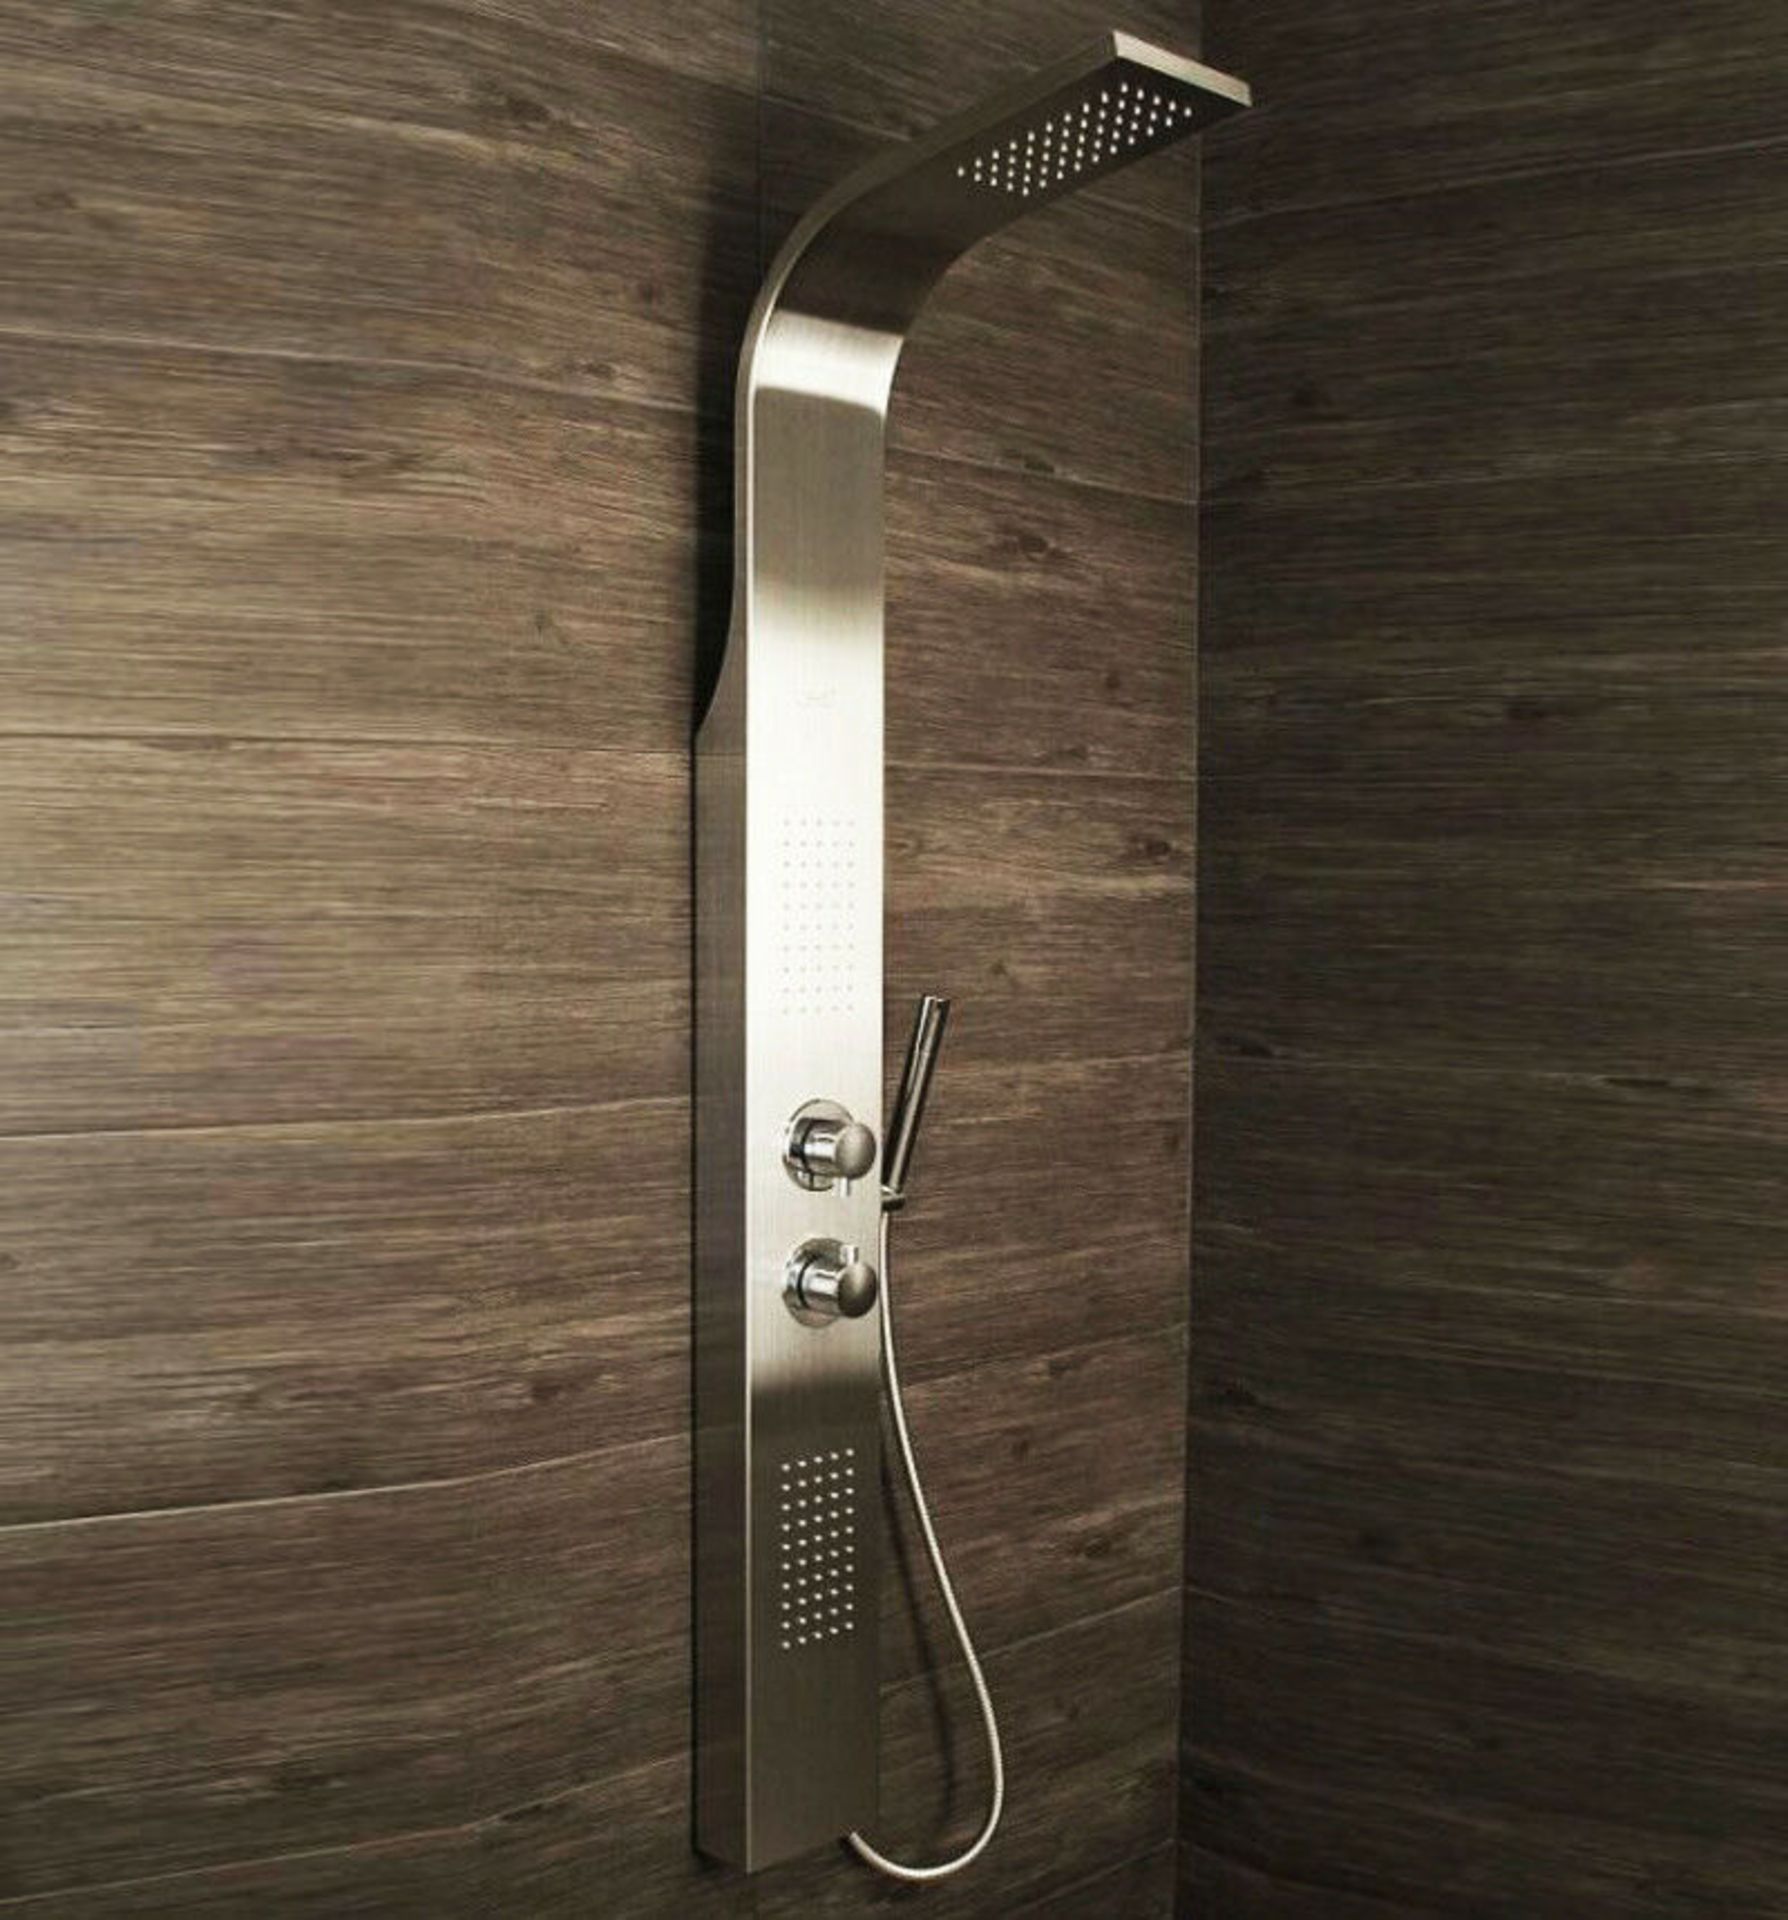 (JL5) Brushed Steel Shower Tower With Luxury body jets. RRP £699.99.Built-in jets provide a r... - Image 2 of 3